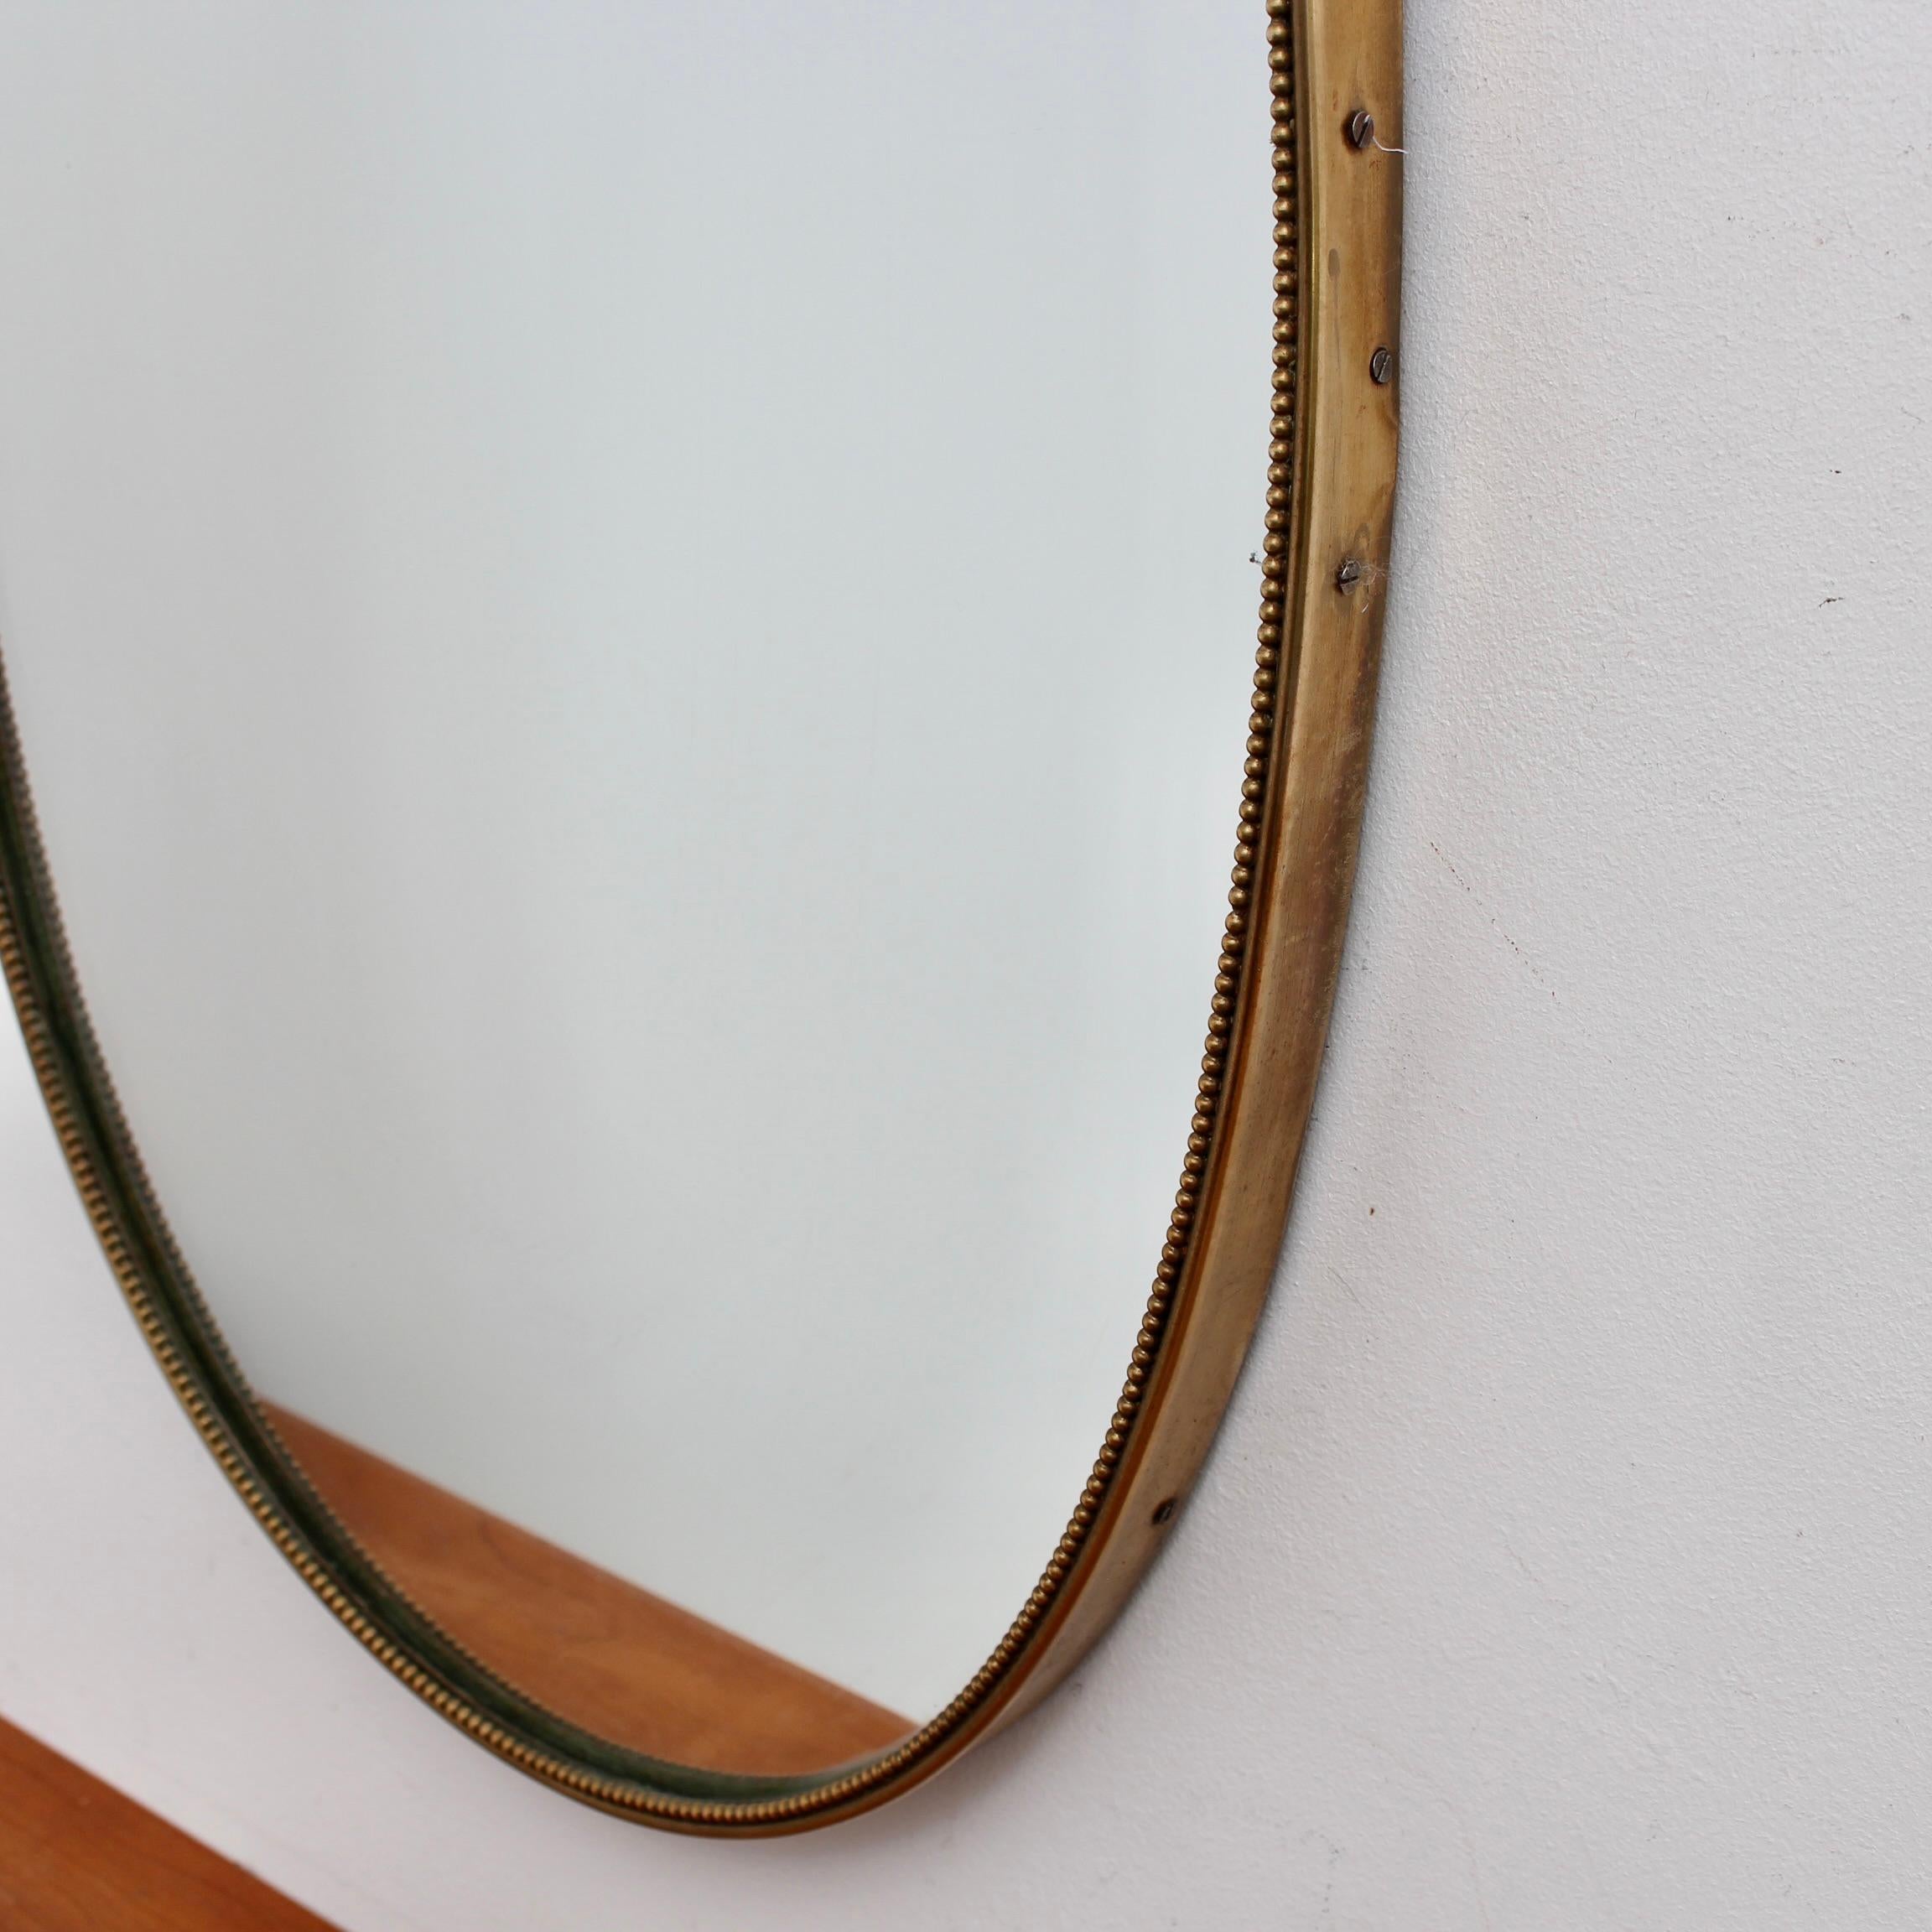 Vintage Italian Oval Wall Mirror with Brass Frame and Beading (circa 1950s) For Sale 3